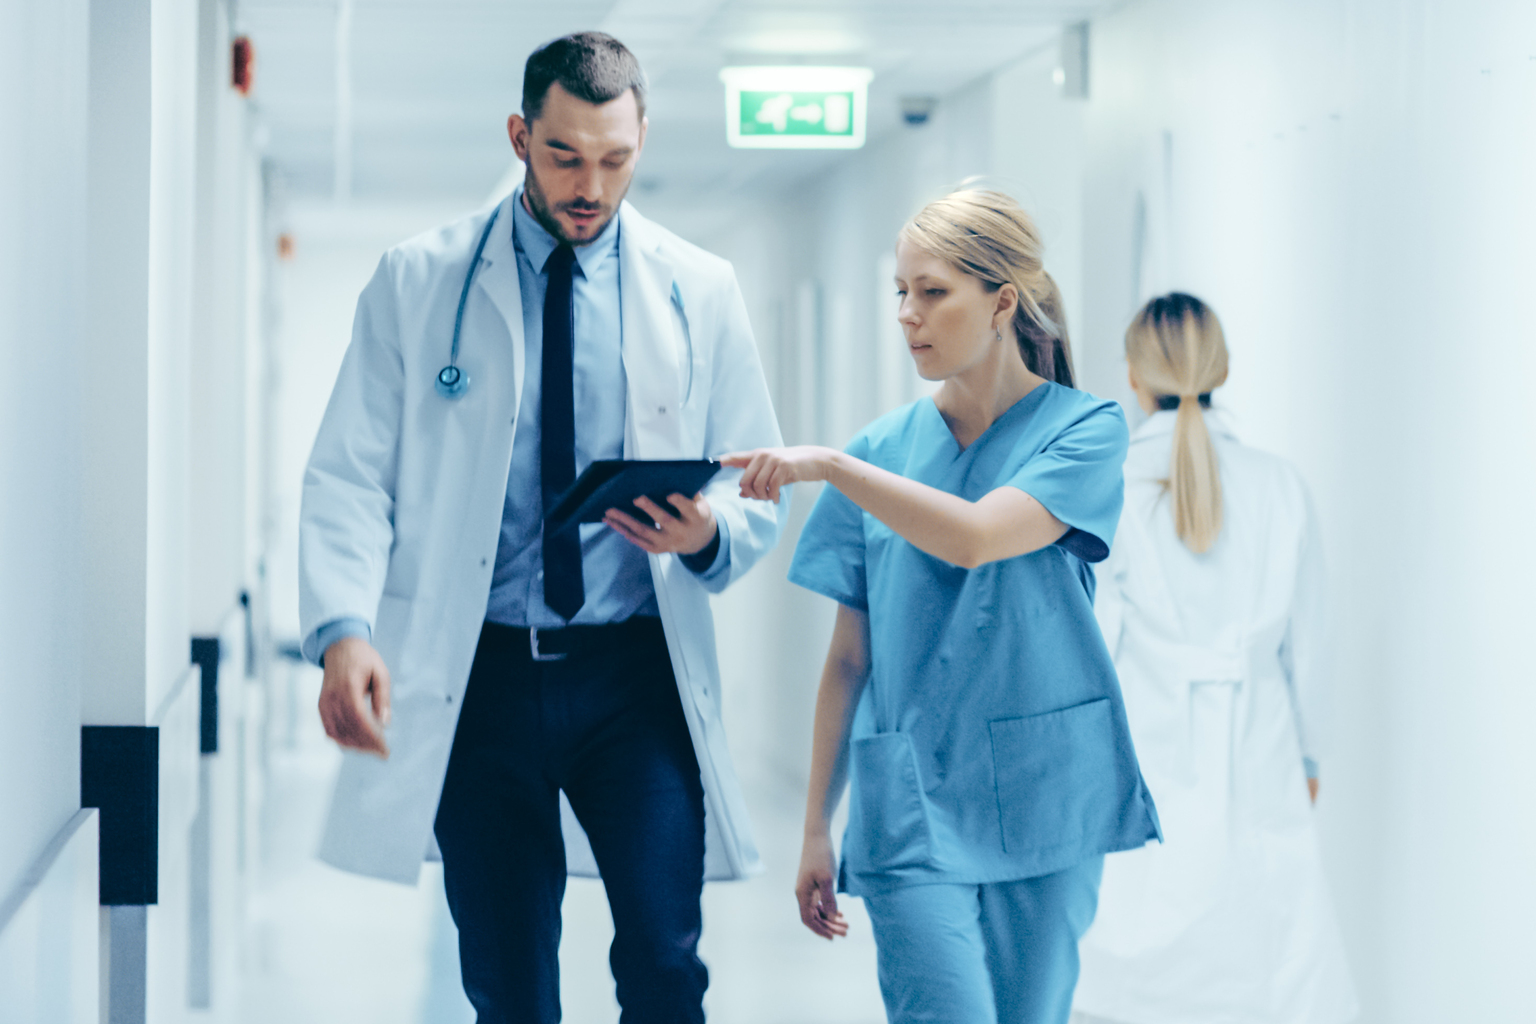 Female surgeon and male doctor walk through hospital hallway, consulting digital tablet computer while talking about patient's health